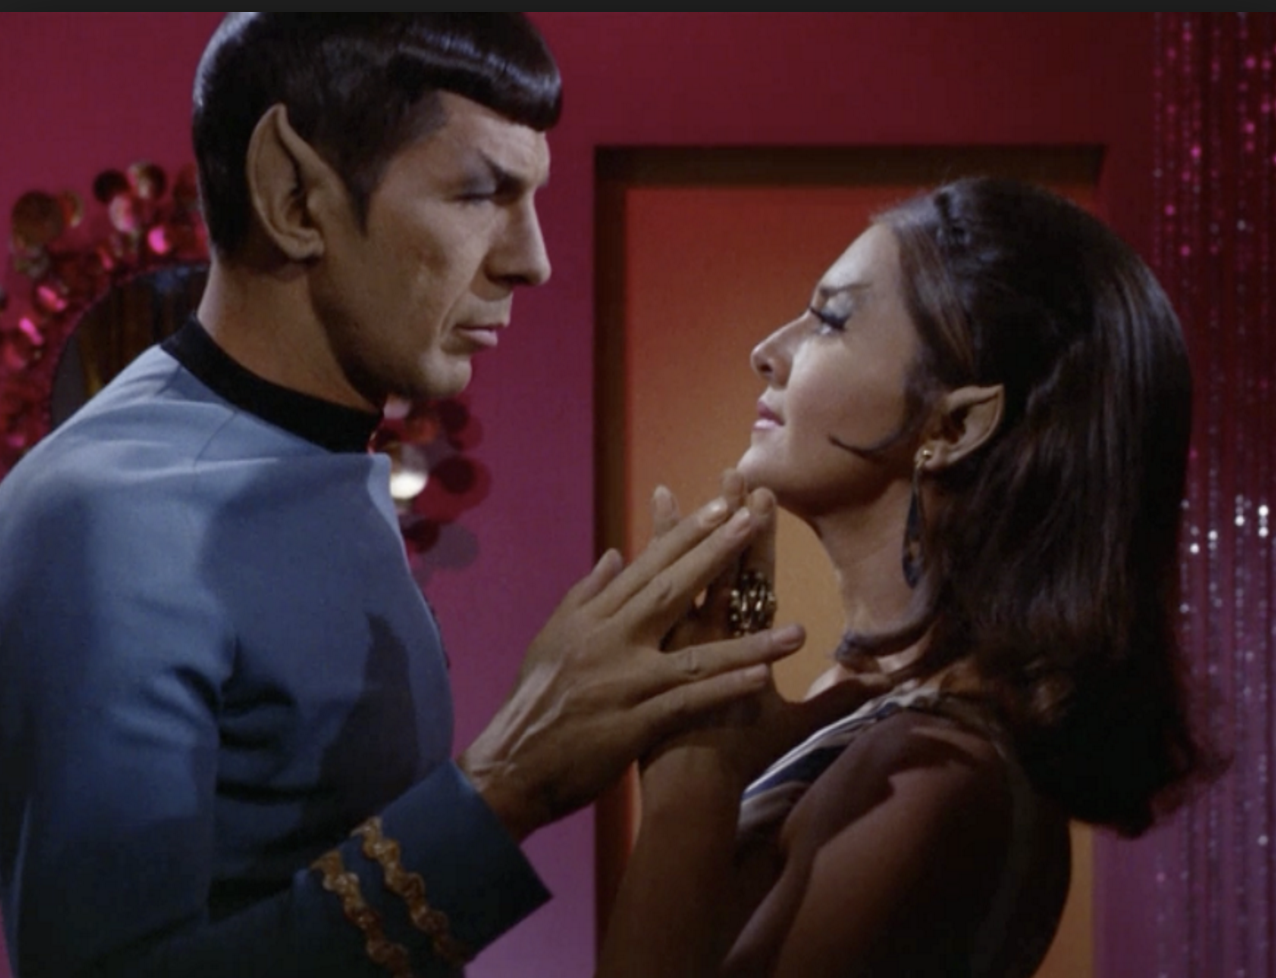 Star Trek Sex The Book Analyzing Star Trek S Sexy And Playful Moments Romulan Commander And Spock